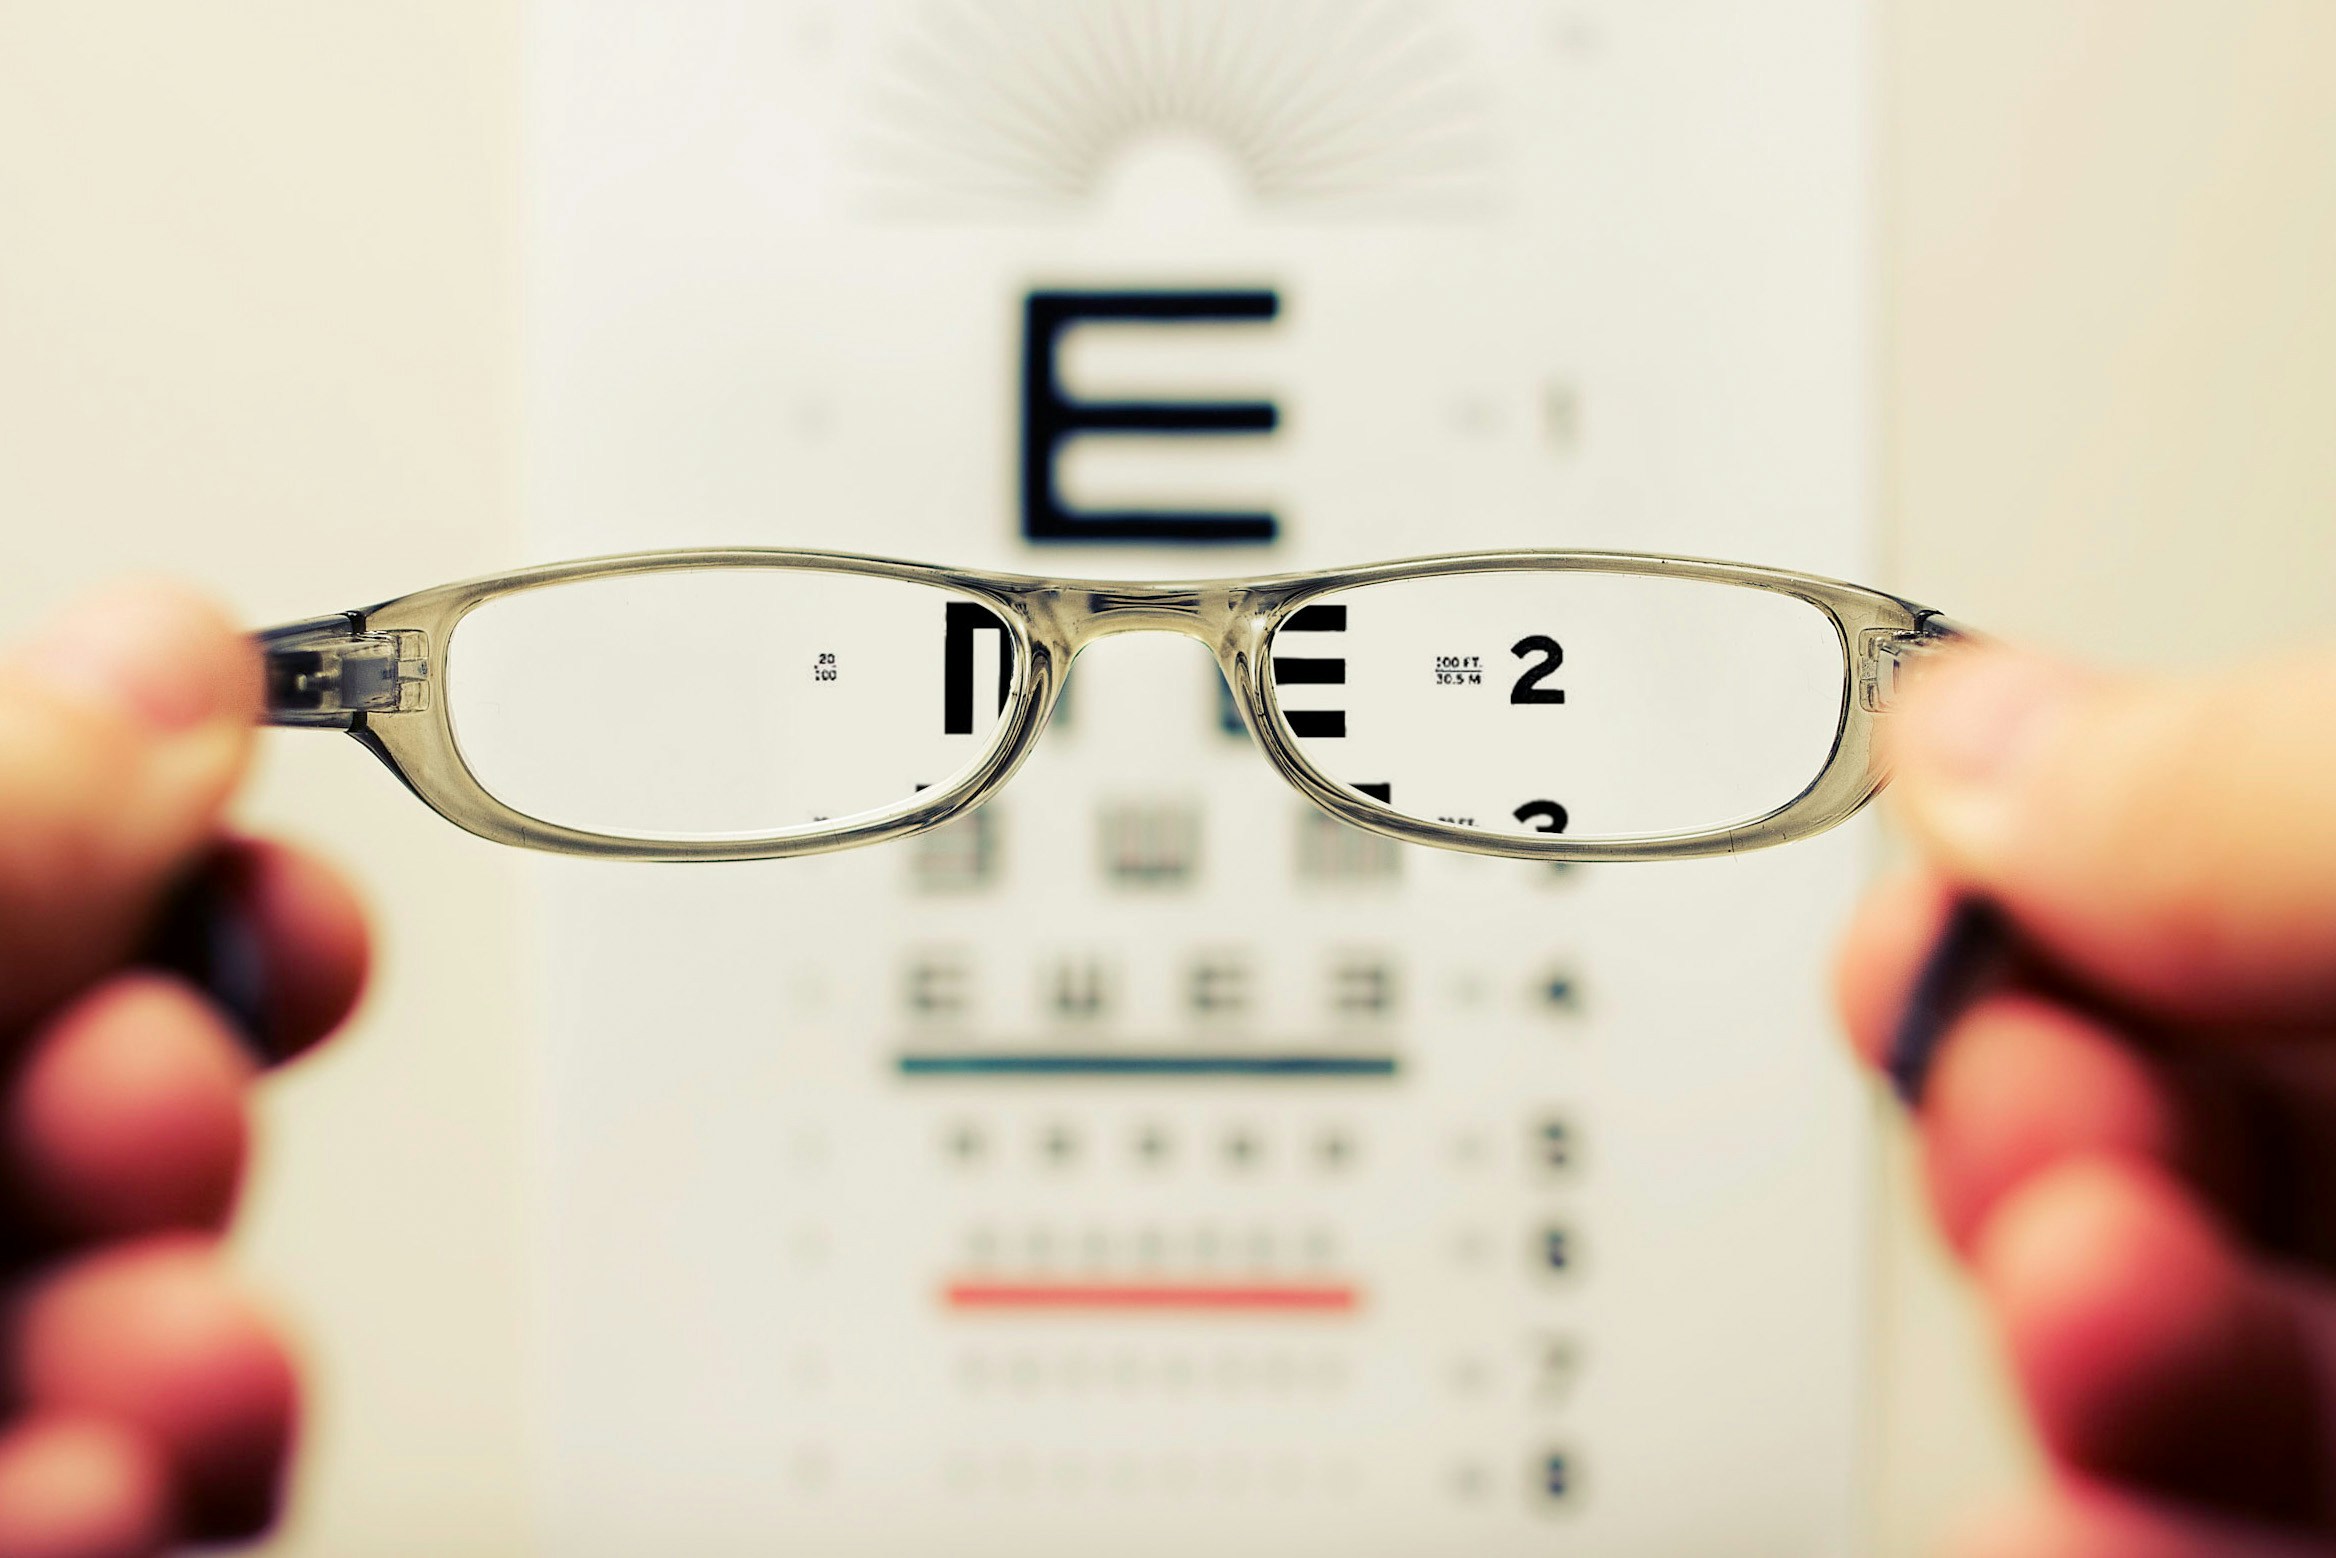 Image of someone holding eye glasses infront of eye test chart